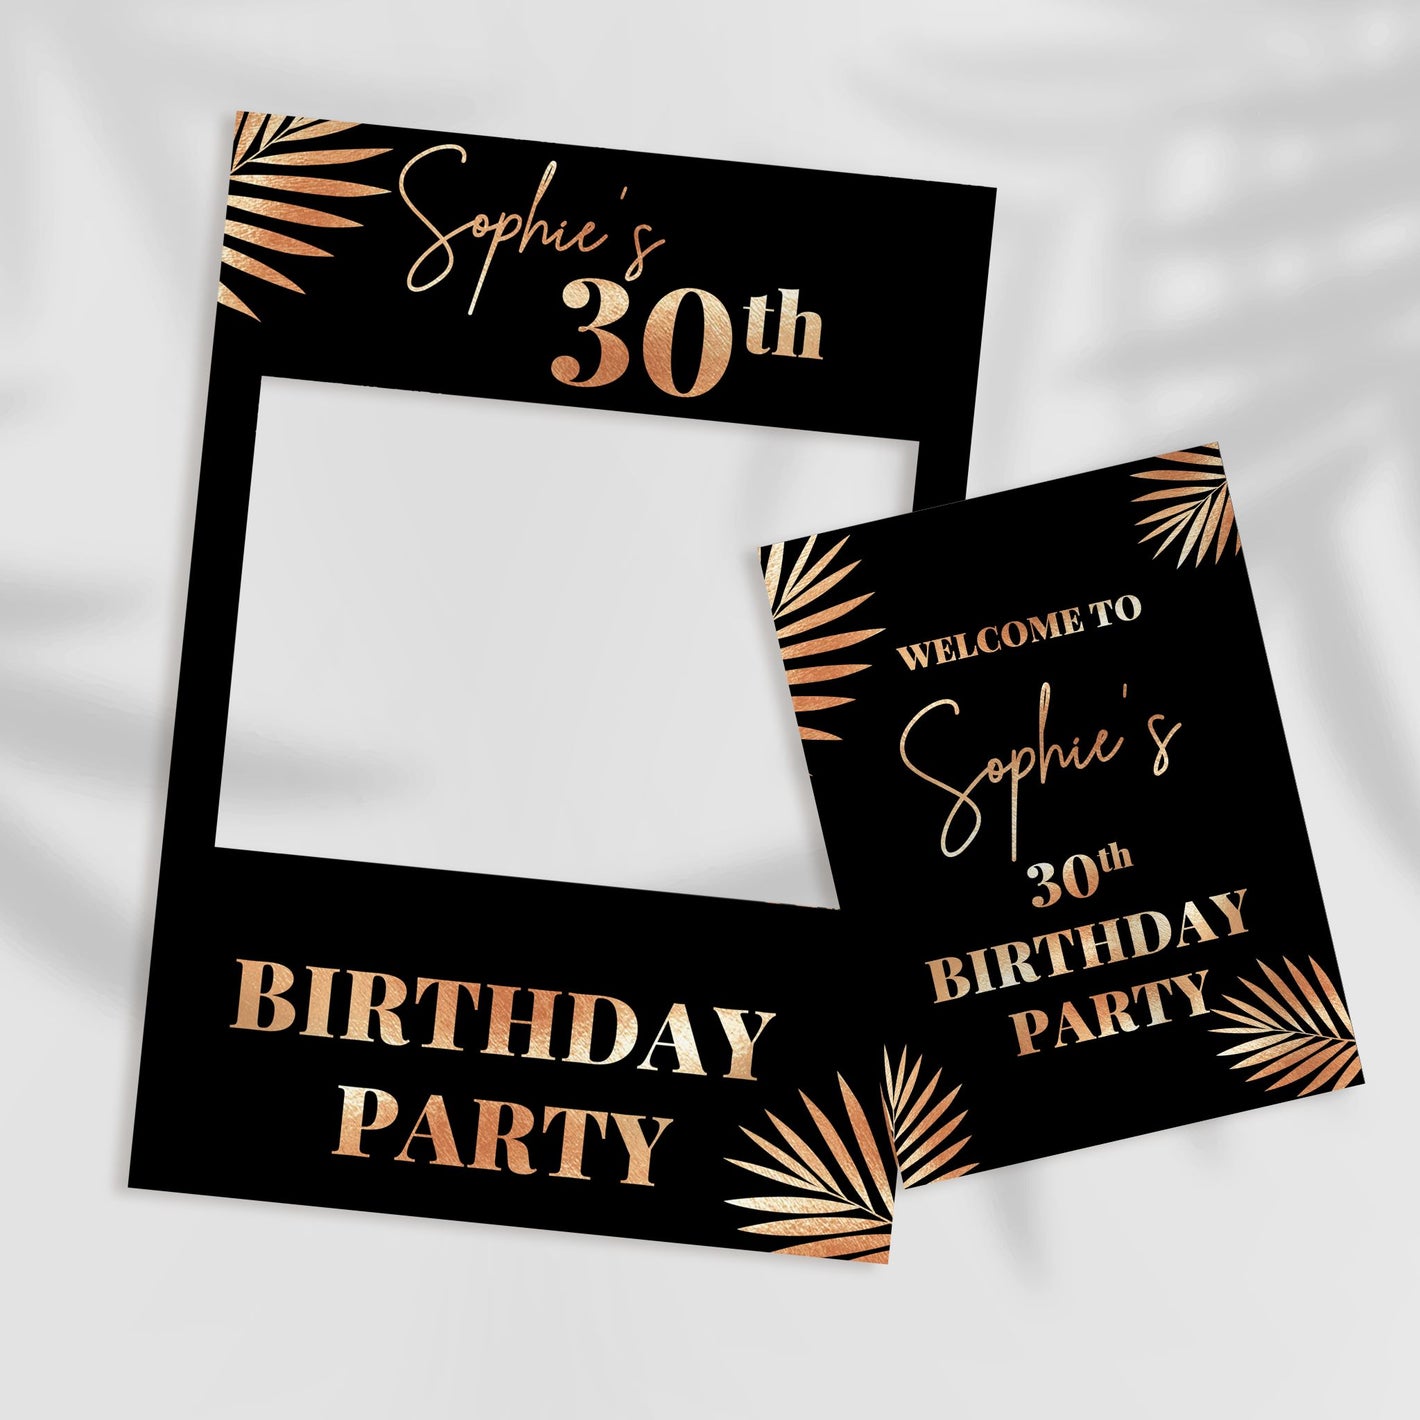 image of a black and gold selfie frame and matching birthday party sign